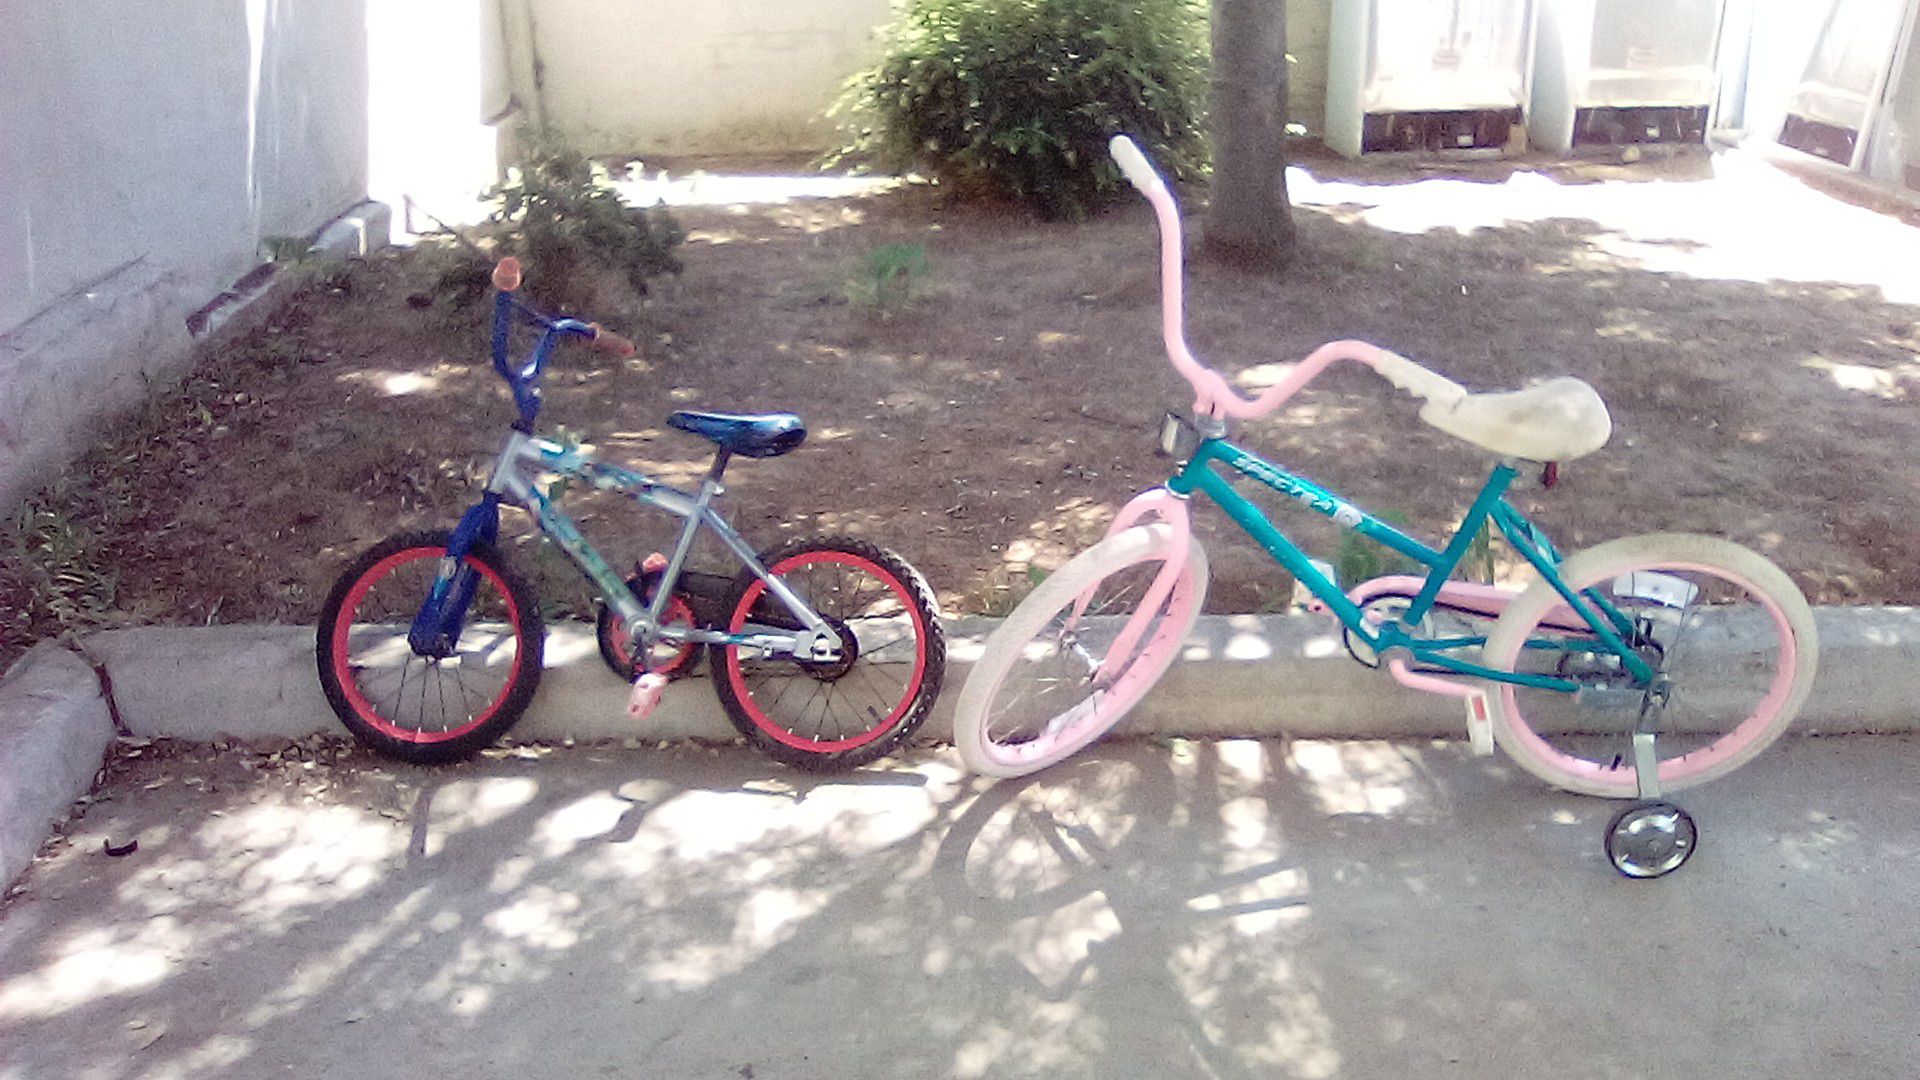 Kids bike 35 Bolt they are in good conditions one of them has it training wheels